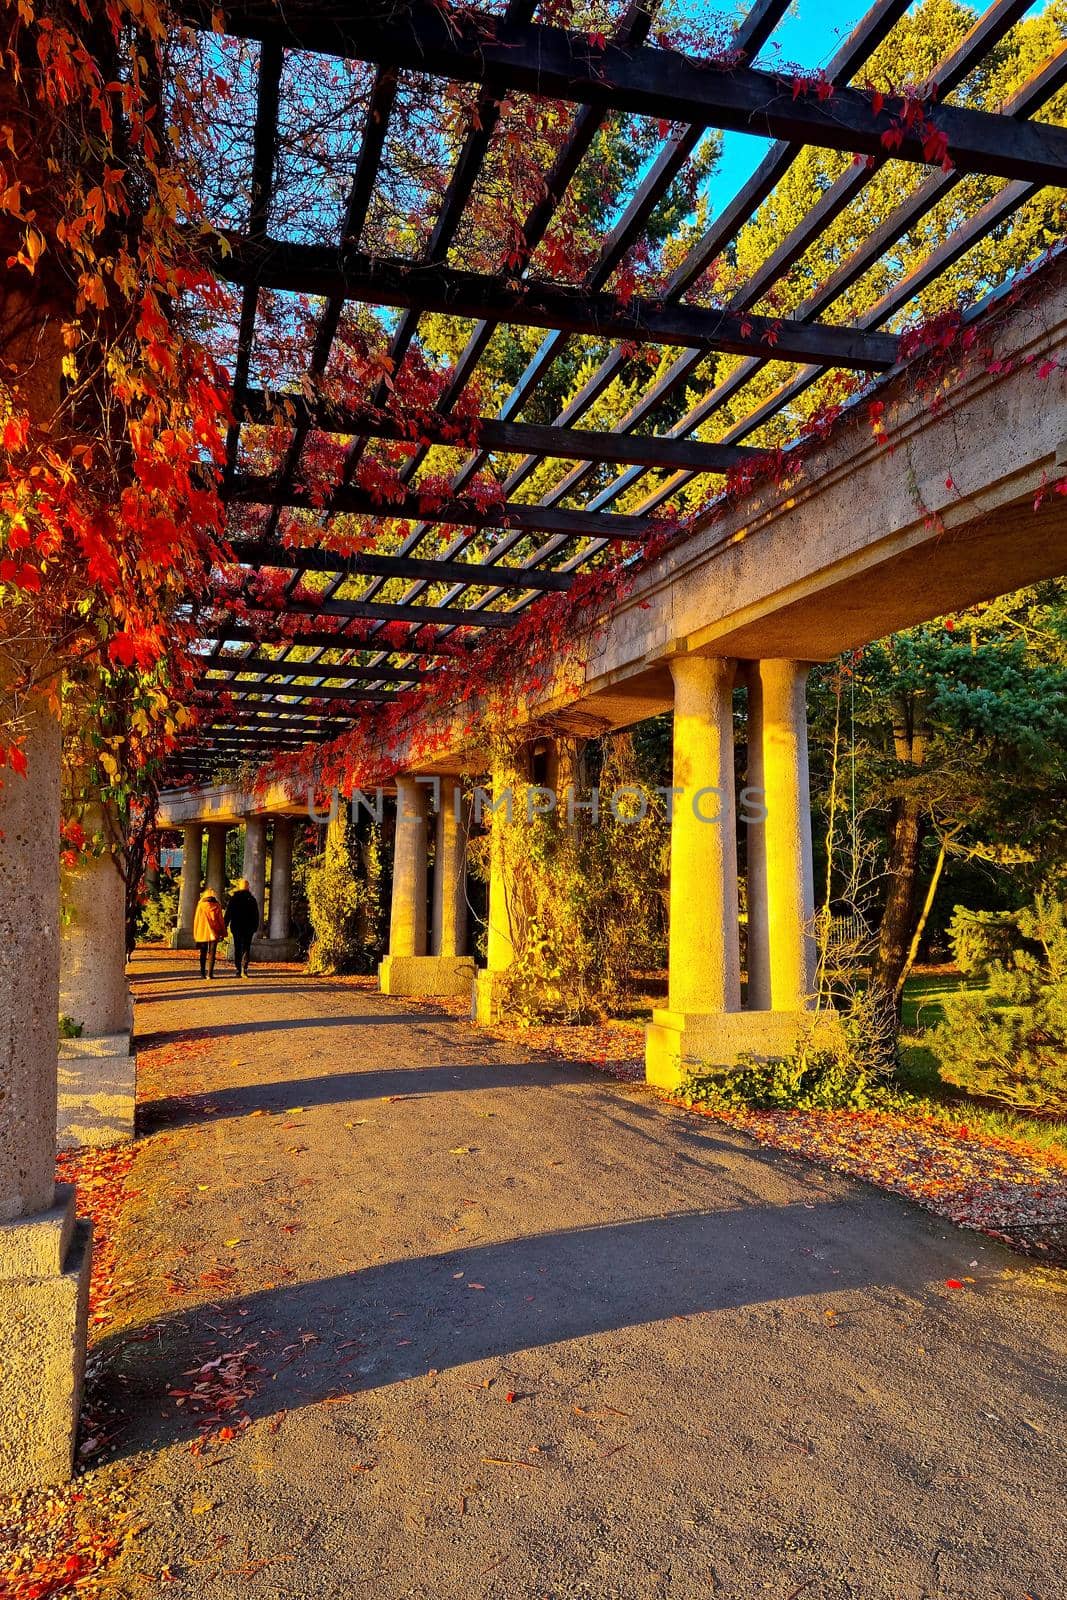 A picturesque view of the concrete structure in the park in autumn